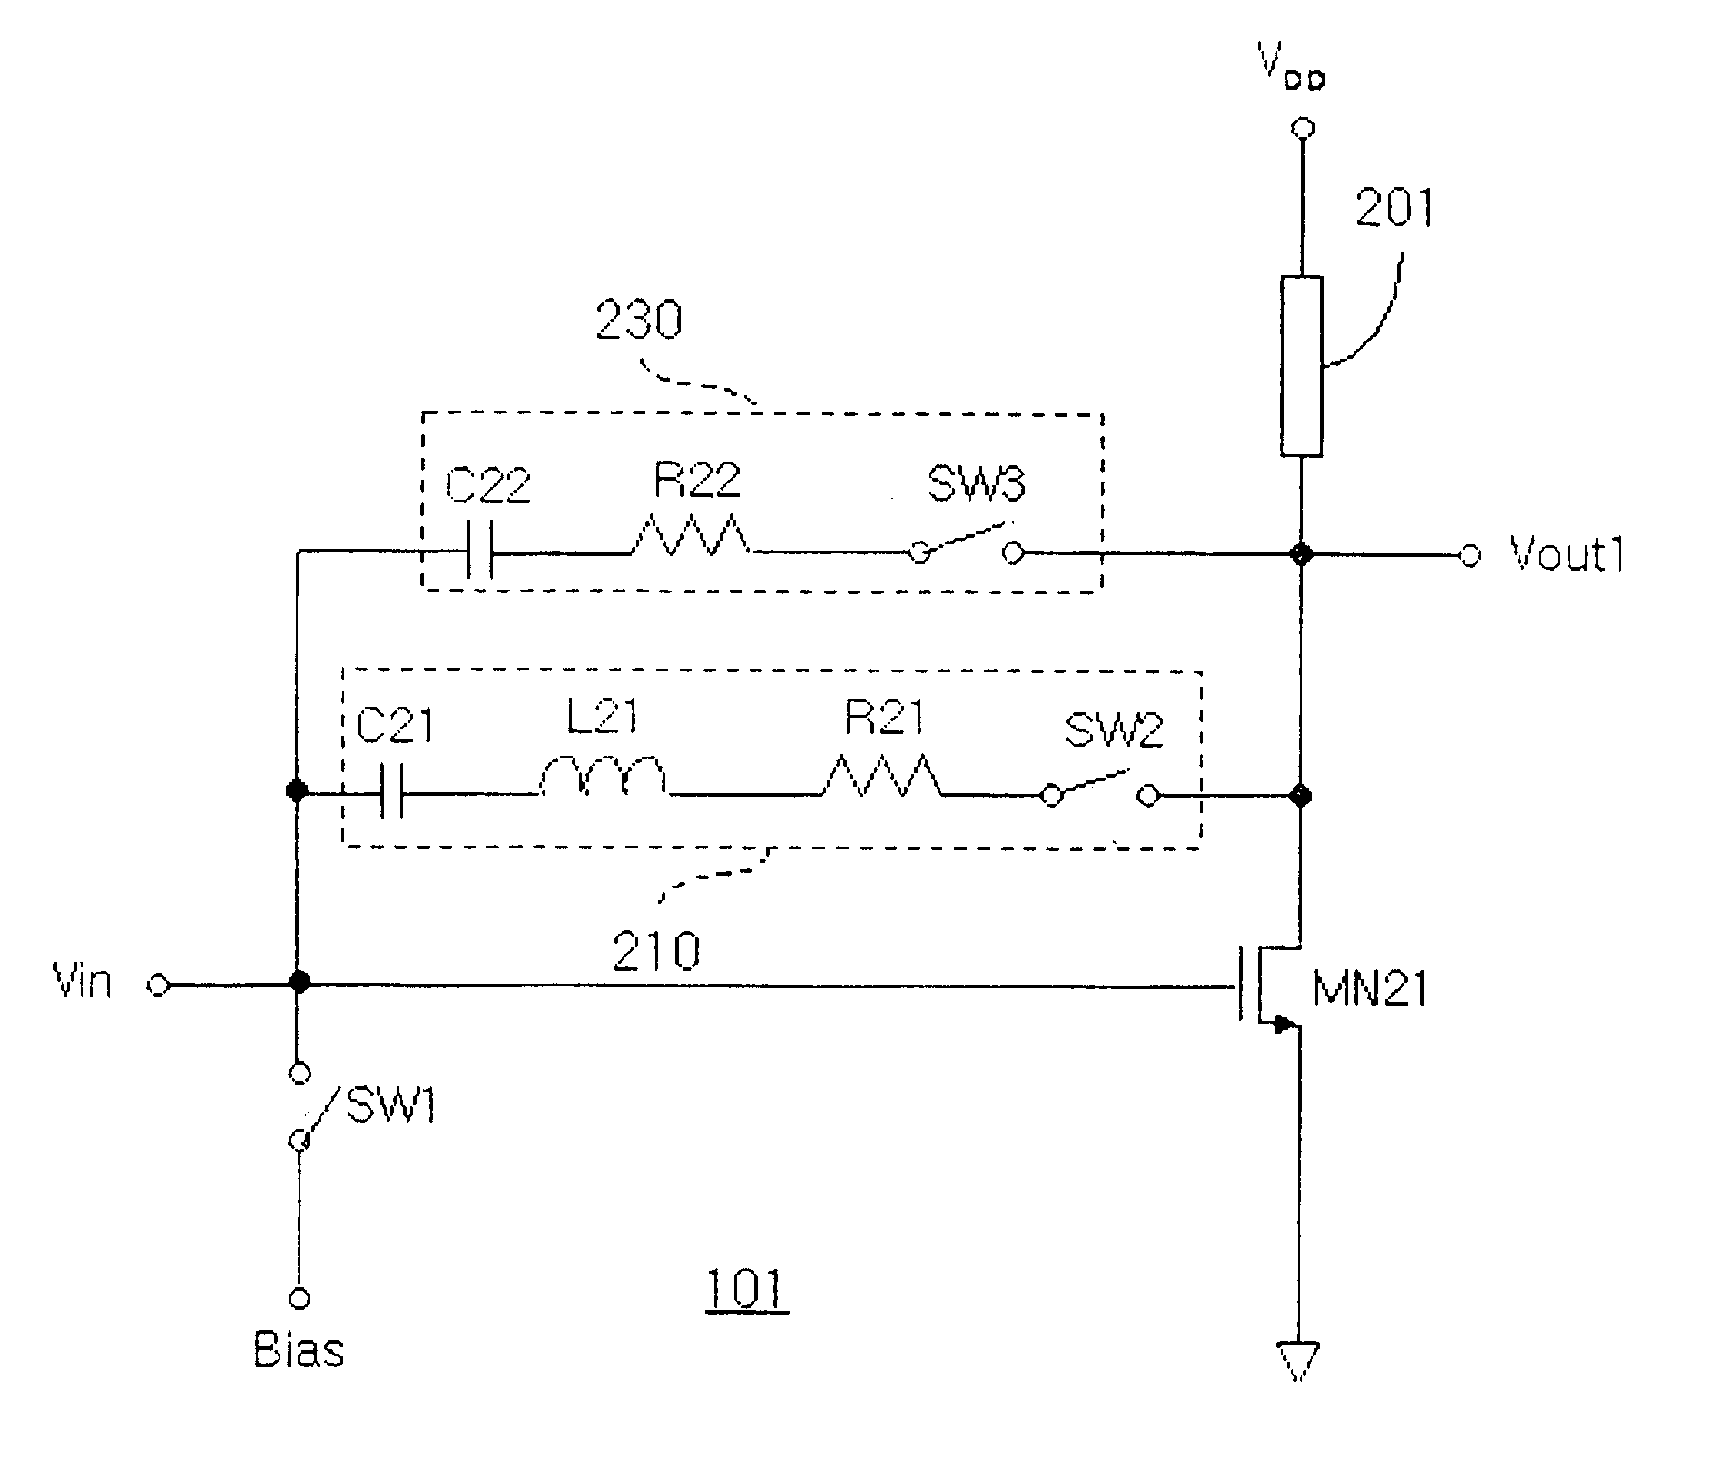 Wideband variable gain amplifier with high linearity operating in switch mode